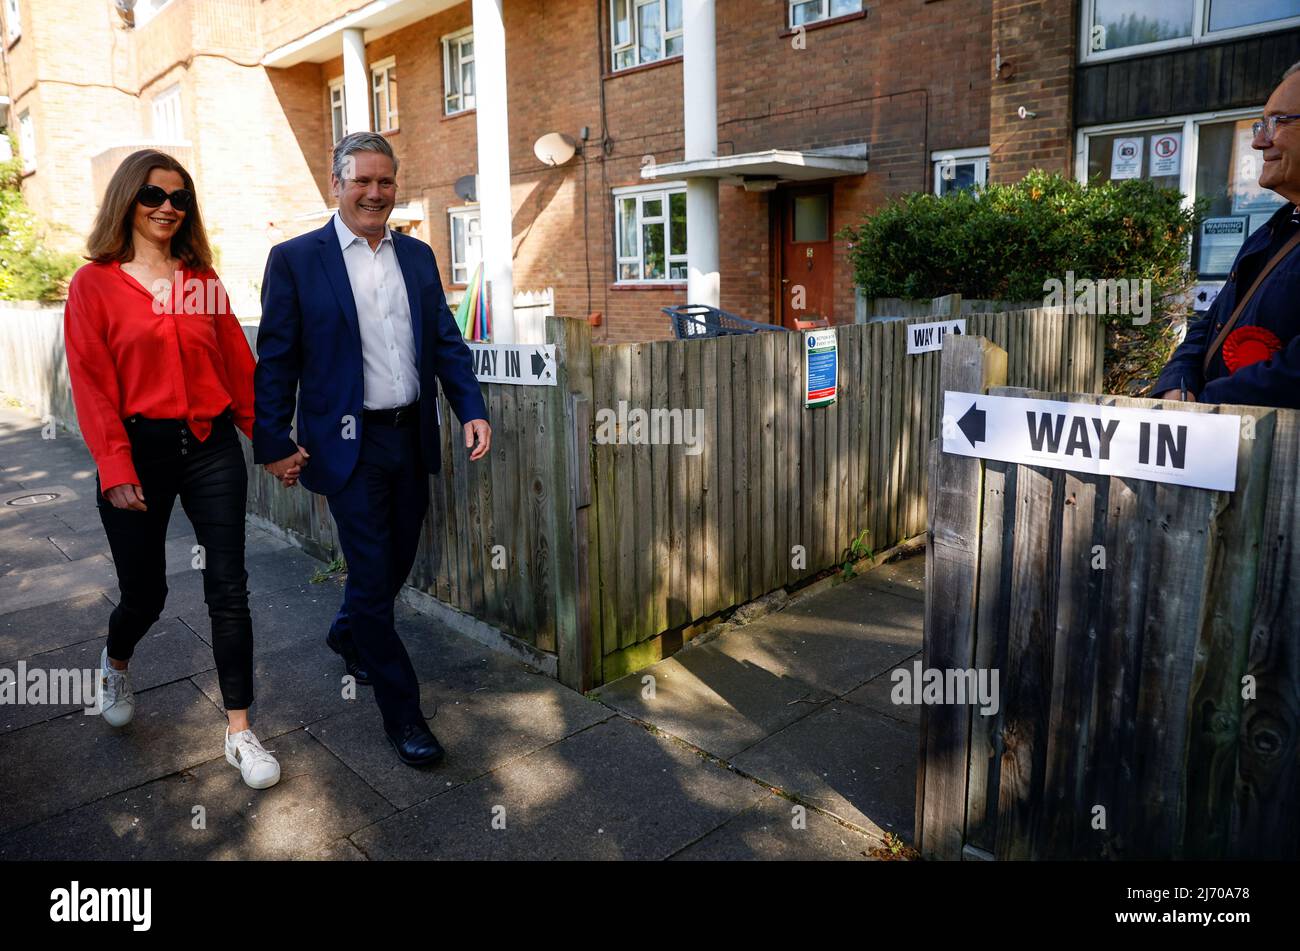 British Labour Party leader Keir Starmer and wife Victoria Starmer arrive at a polling station during the local elections in Kentish Town, London, Britain May 5, 2022. REUTERS/John Sibley Stock Photo